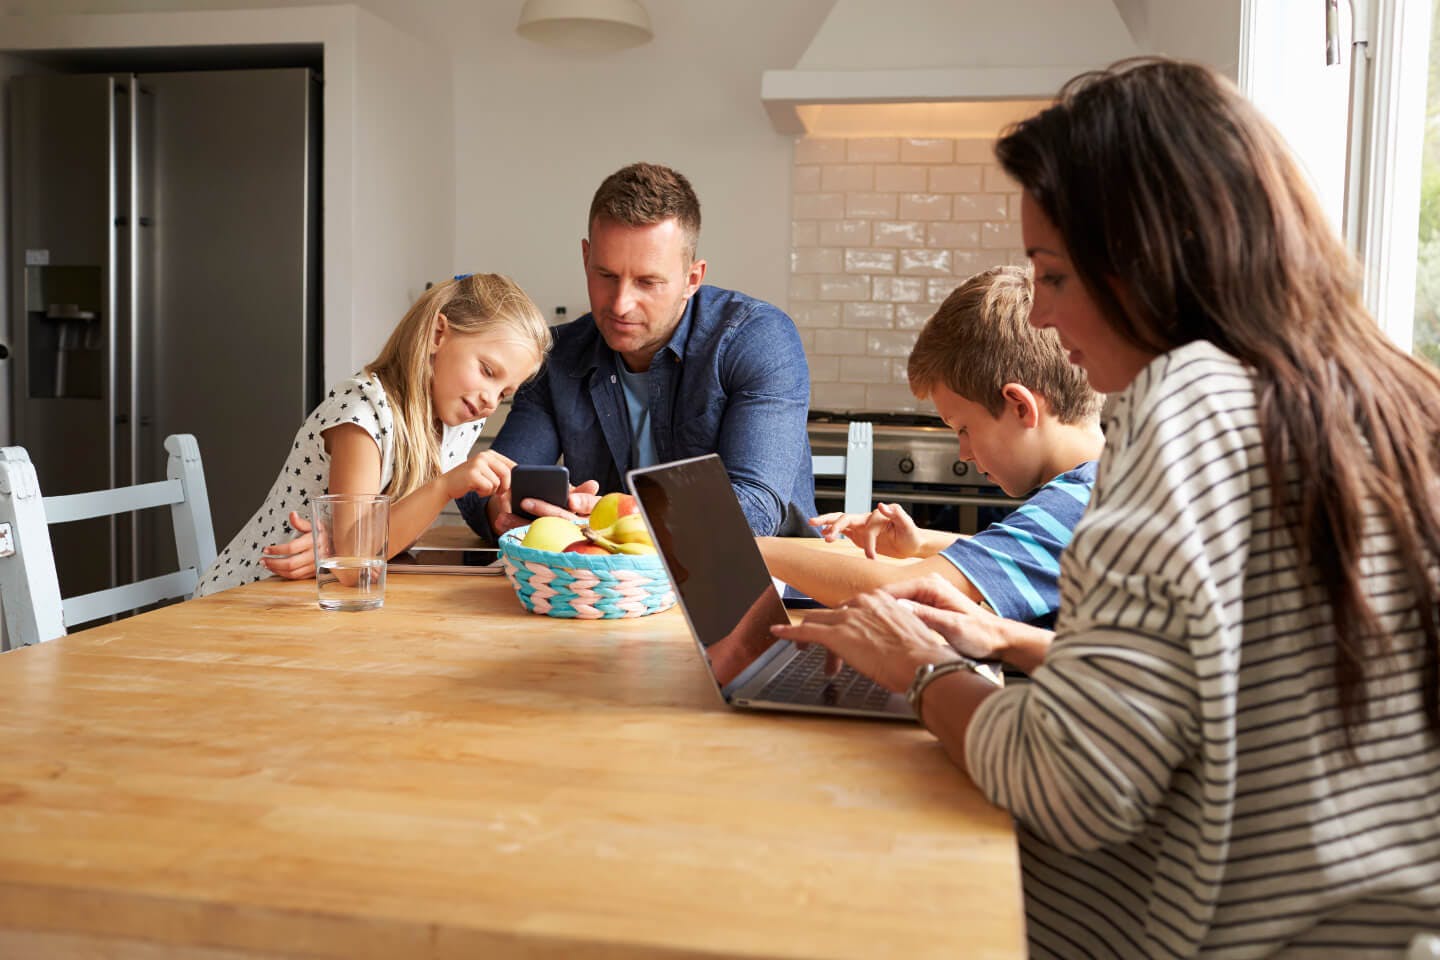 Family at table using gadgets